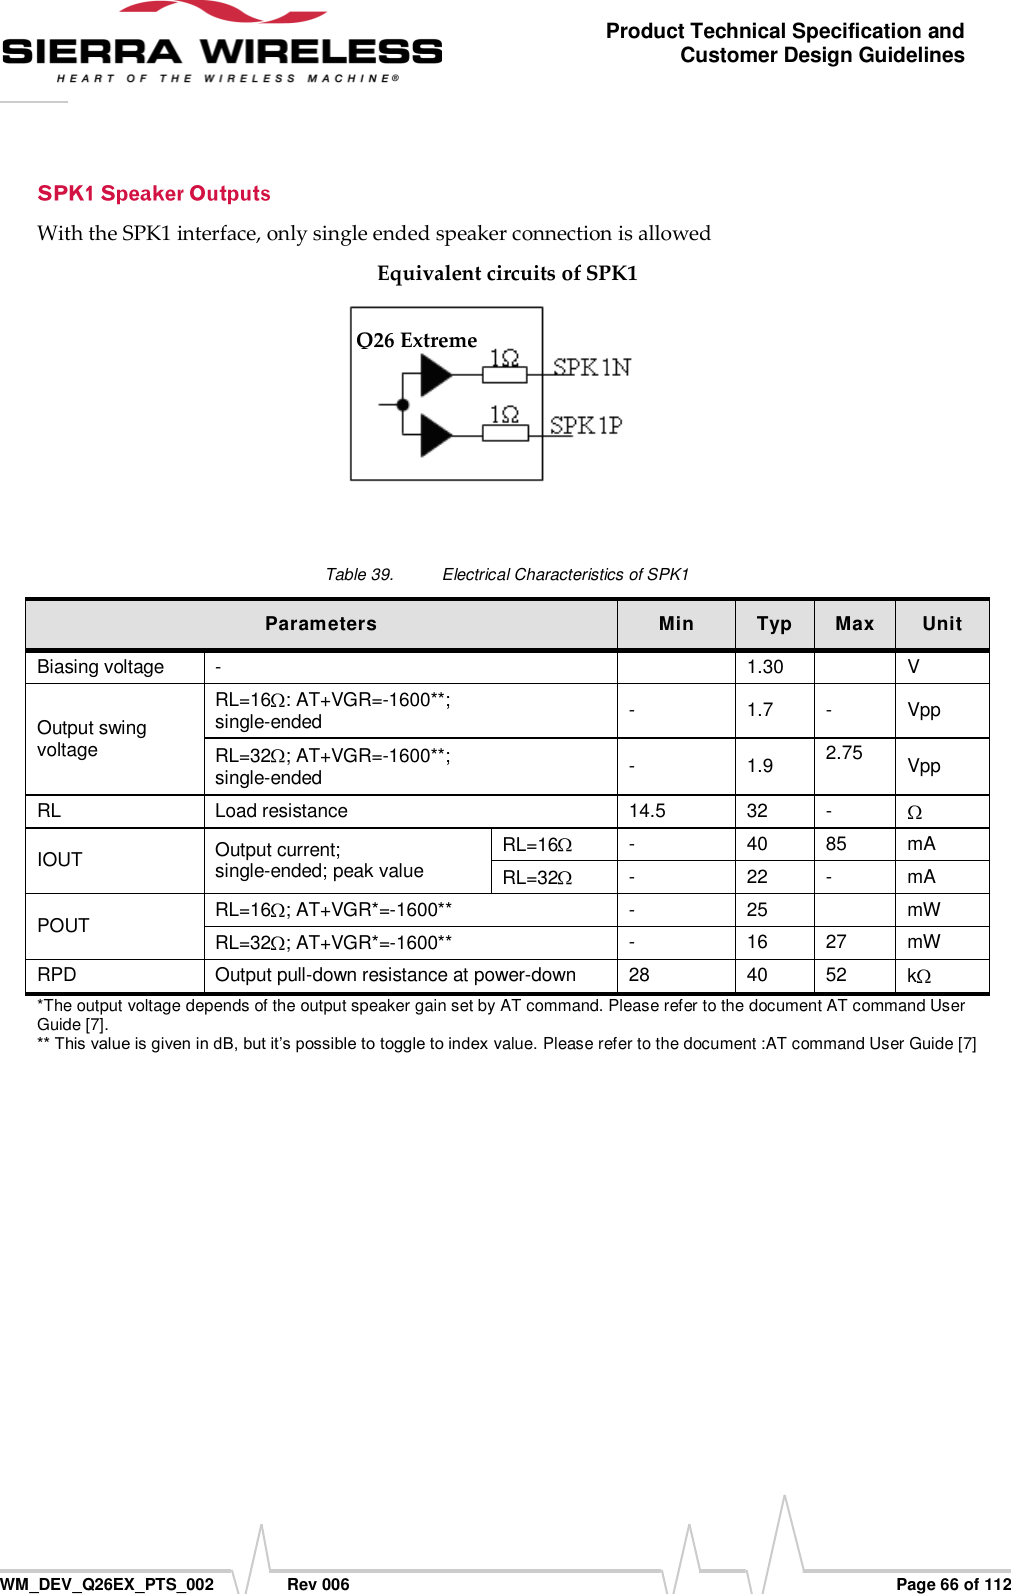      WM_DEV_Q26EX_PTS_002  Rev 006  Page 66 of 112 Product Technical Specification and Customer Design Guidelines With the SPK1 interface, only single ended speaker connection is allowed Equivalent circuits of SPK1   Table 39.  Electrical Characteristics of SPK1 Parameters Min Typ Max Unit Biasing voltage -  1.30  V Output swing voltage RL=16 : AT+VGR=-1600**;  single-ended - 1.7 - Vpp RL=32 ; AT+VGR=-1600**;  single-ended - 1.9 2.75  Vpp RL Load resistance 14.5 32 -  IOUT Output current;  single-ended; peak value RL=16  - 40 85 mA RL=32  - 22 - mA POUT RL=16 ; AT+VGR*=-1600** - 25  mW RL=32 ; AT+VGR*=-1600** - 16 27 mW RPD Output pull-down resistance at power-down 28 40 52 k  *The output voltage depends of the output speaker gain set by AT command. Please refer to the document AT command User Guide [7]. ** This value is given in dB, but it’s possible to toggle to index value. Please refer to the document :AT command User Guide [7] Q26 Extreme 